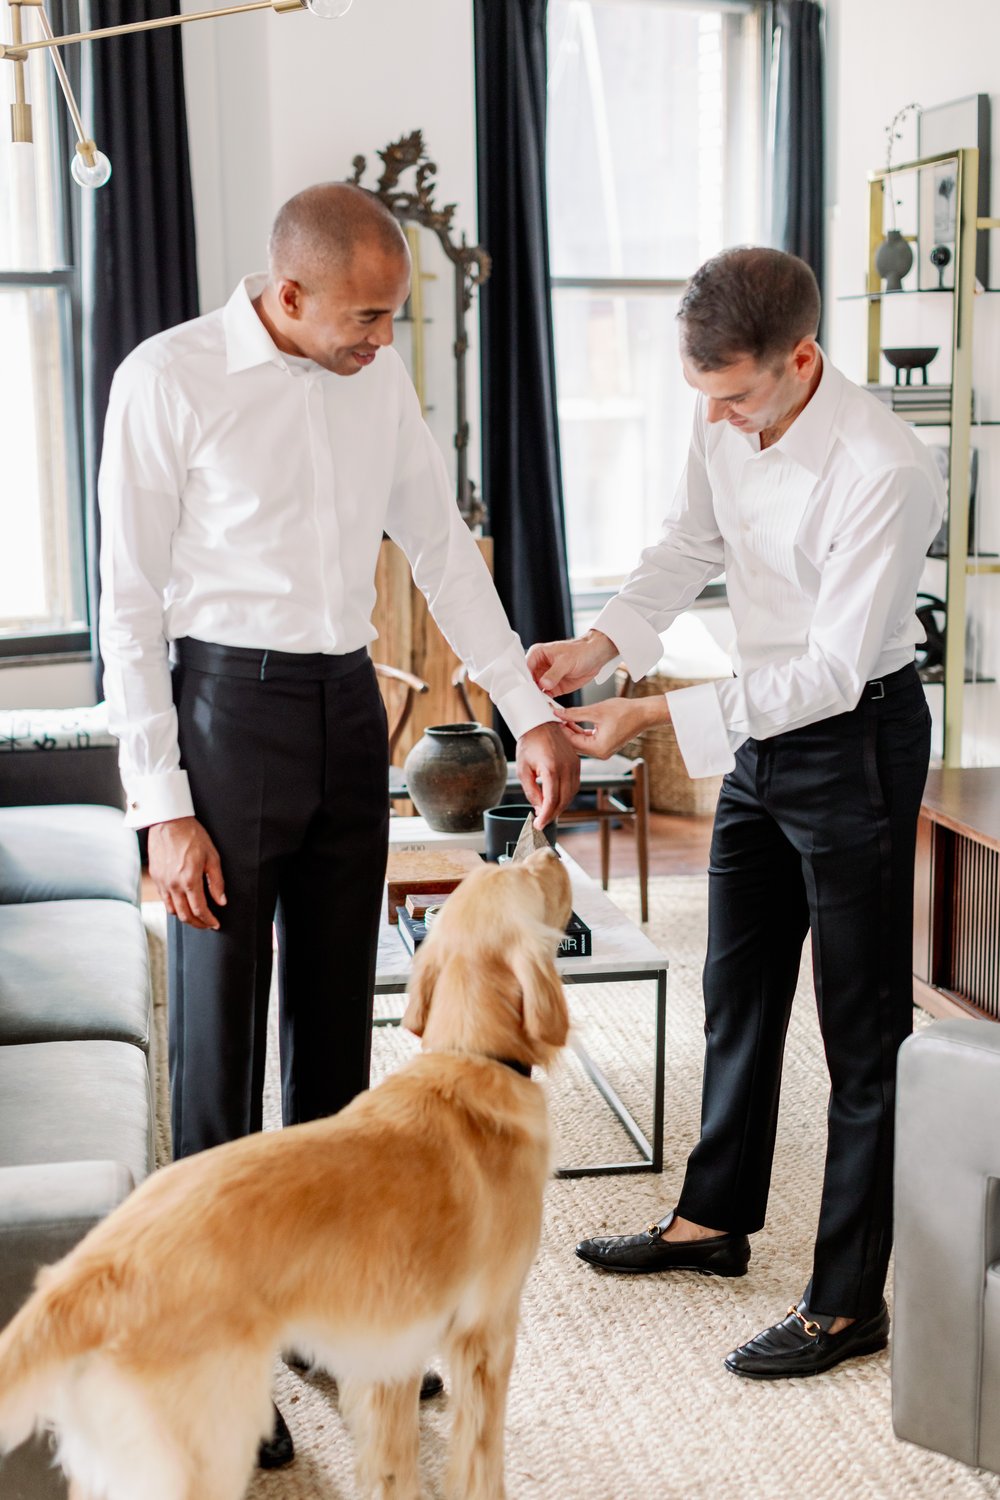 Getting Ready at Home...With Your Dog!